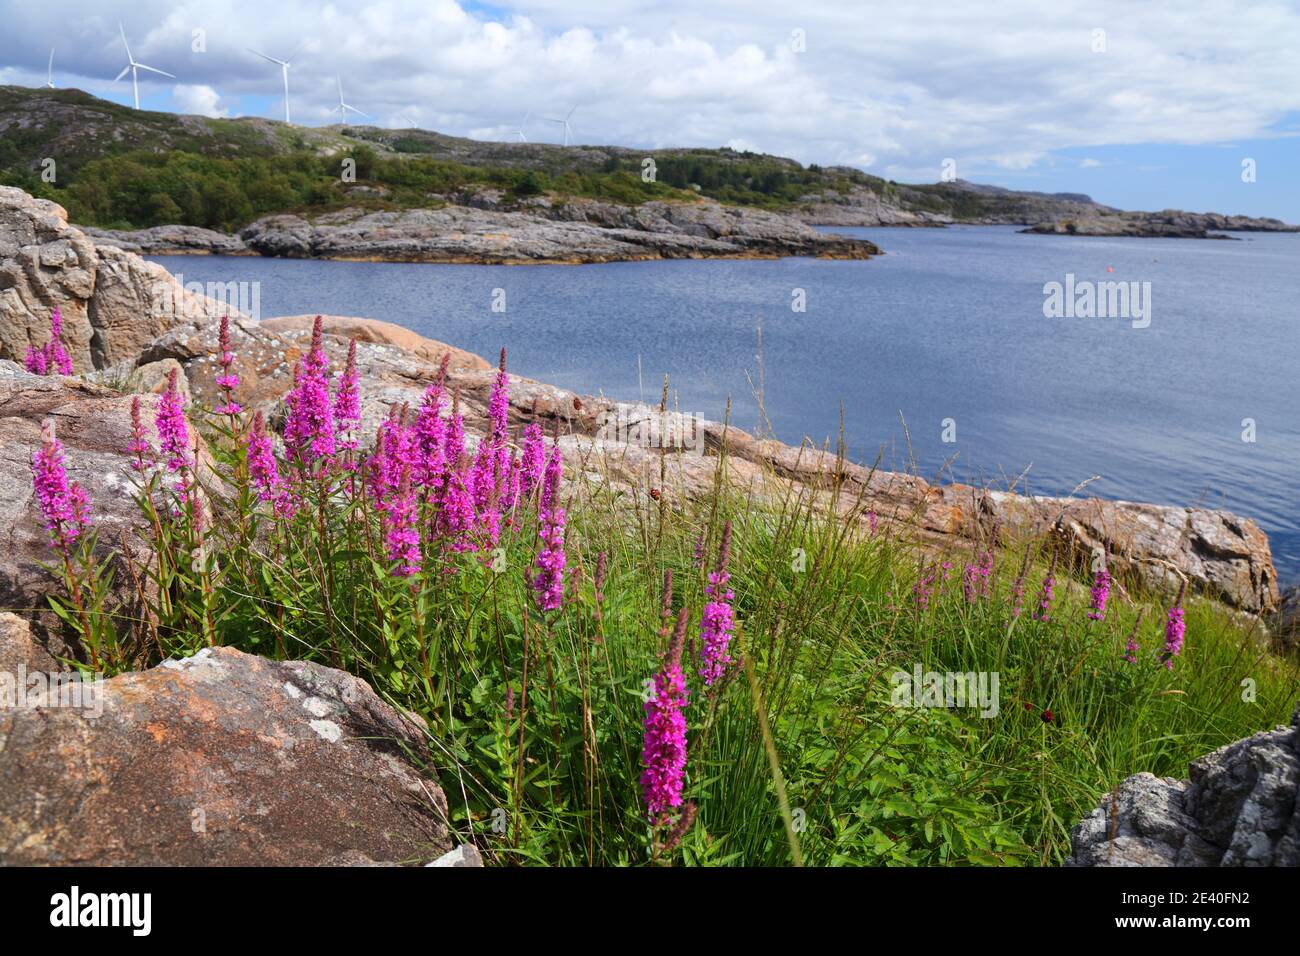 Norway coast landscape with fireweed flowers. Egersund in Rogaland region. Stock Photo